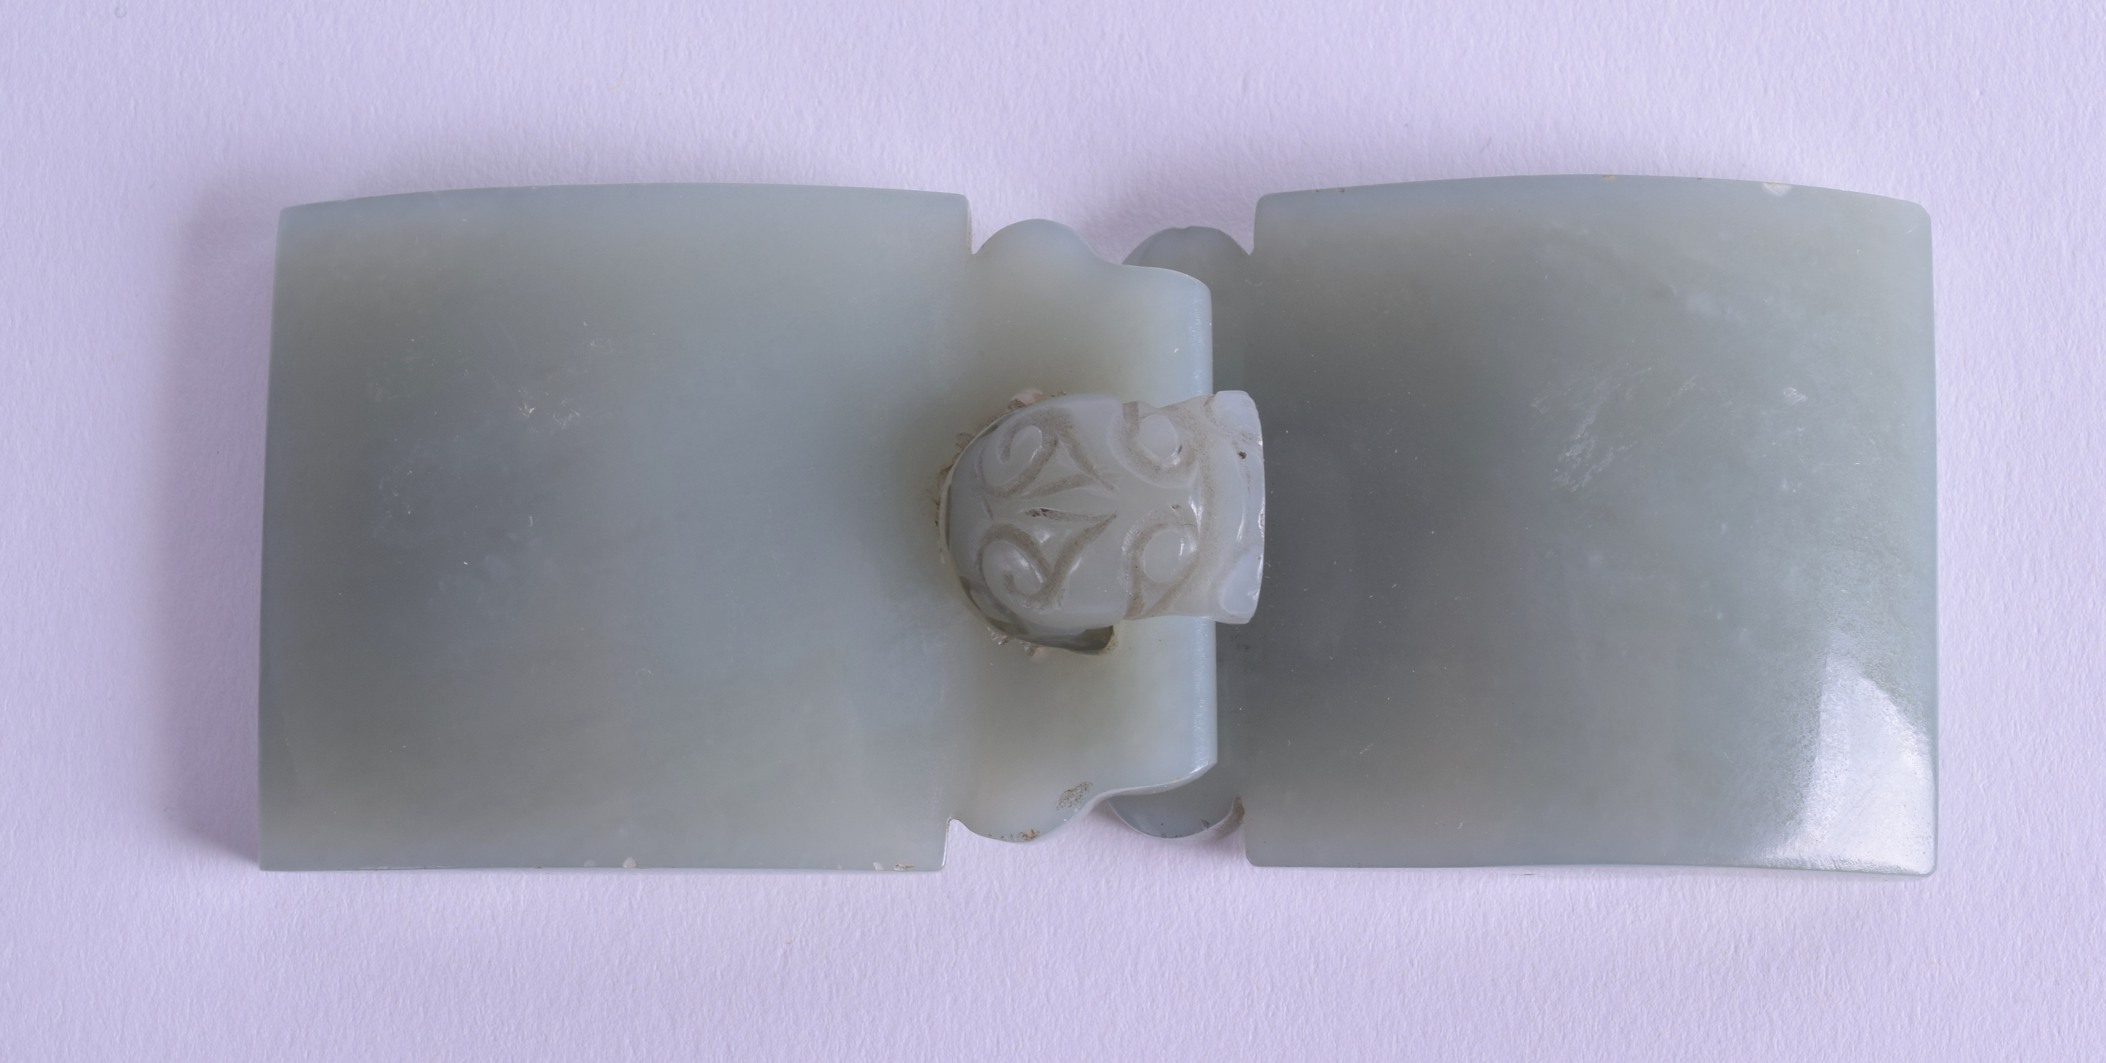 AN 18TH CENTURY CHINESE GREEN JADE BELT BUCKLE formed with kylin mask heads. Overall 11.5 cm x 4.